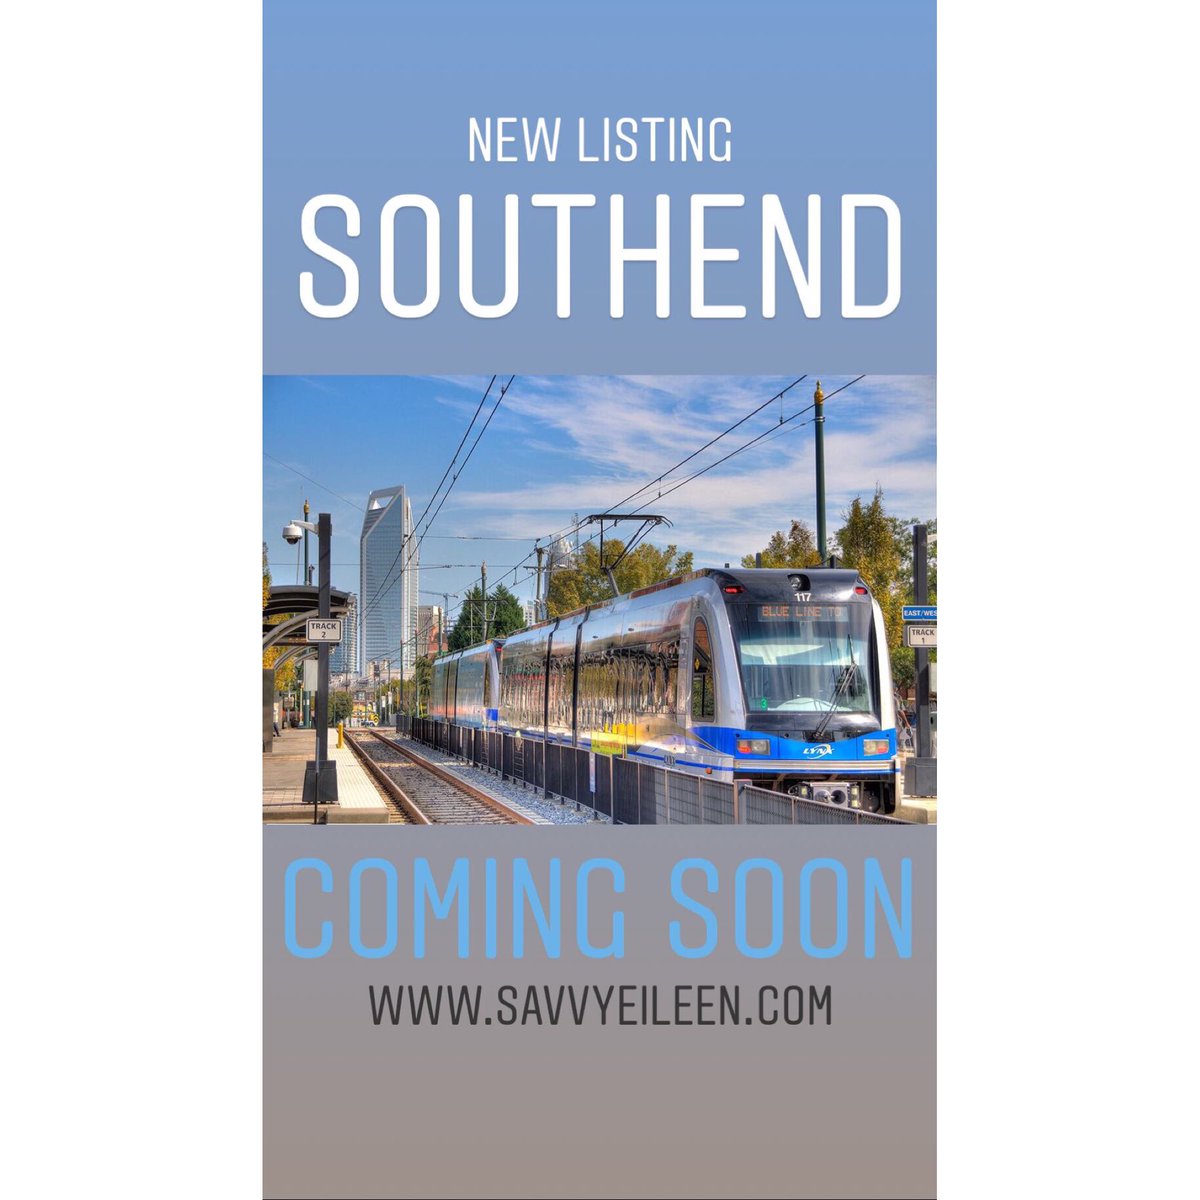 New listing in the marvelous @SouthEndCLT coming soon! // #charlotterealestate #cltrealestate #charlottesgotalot #queencity #explorecharlotte #railtrailclt #historicsouthend #getsavvy